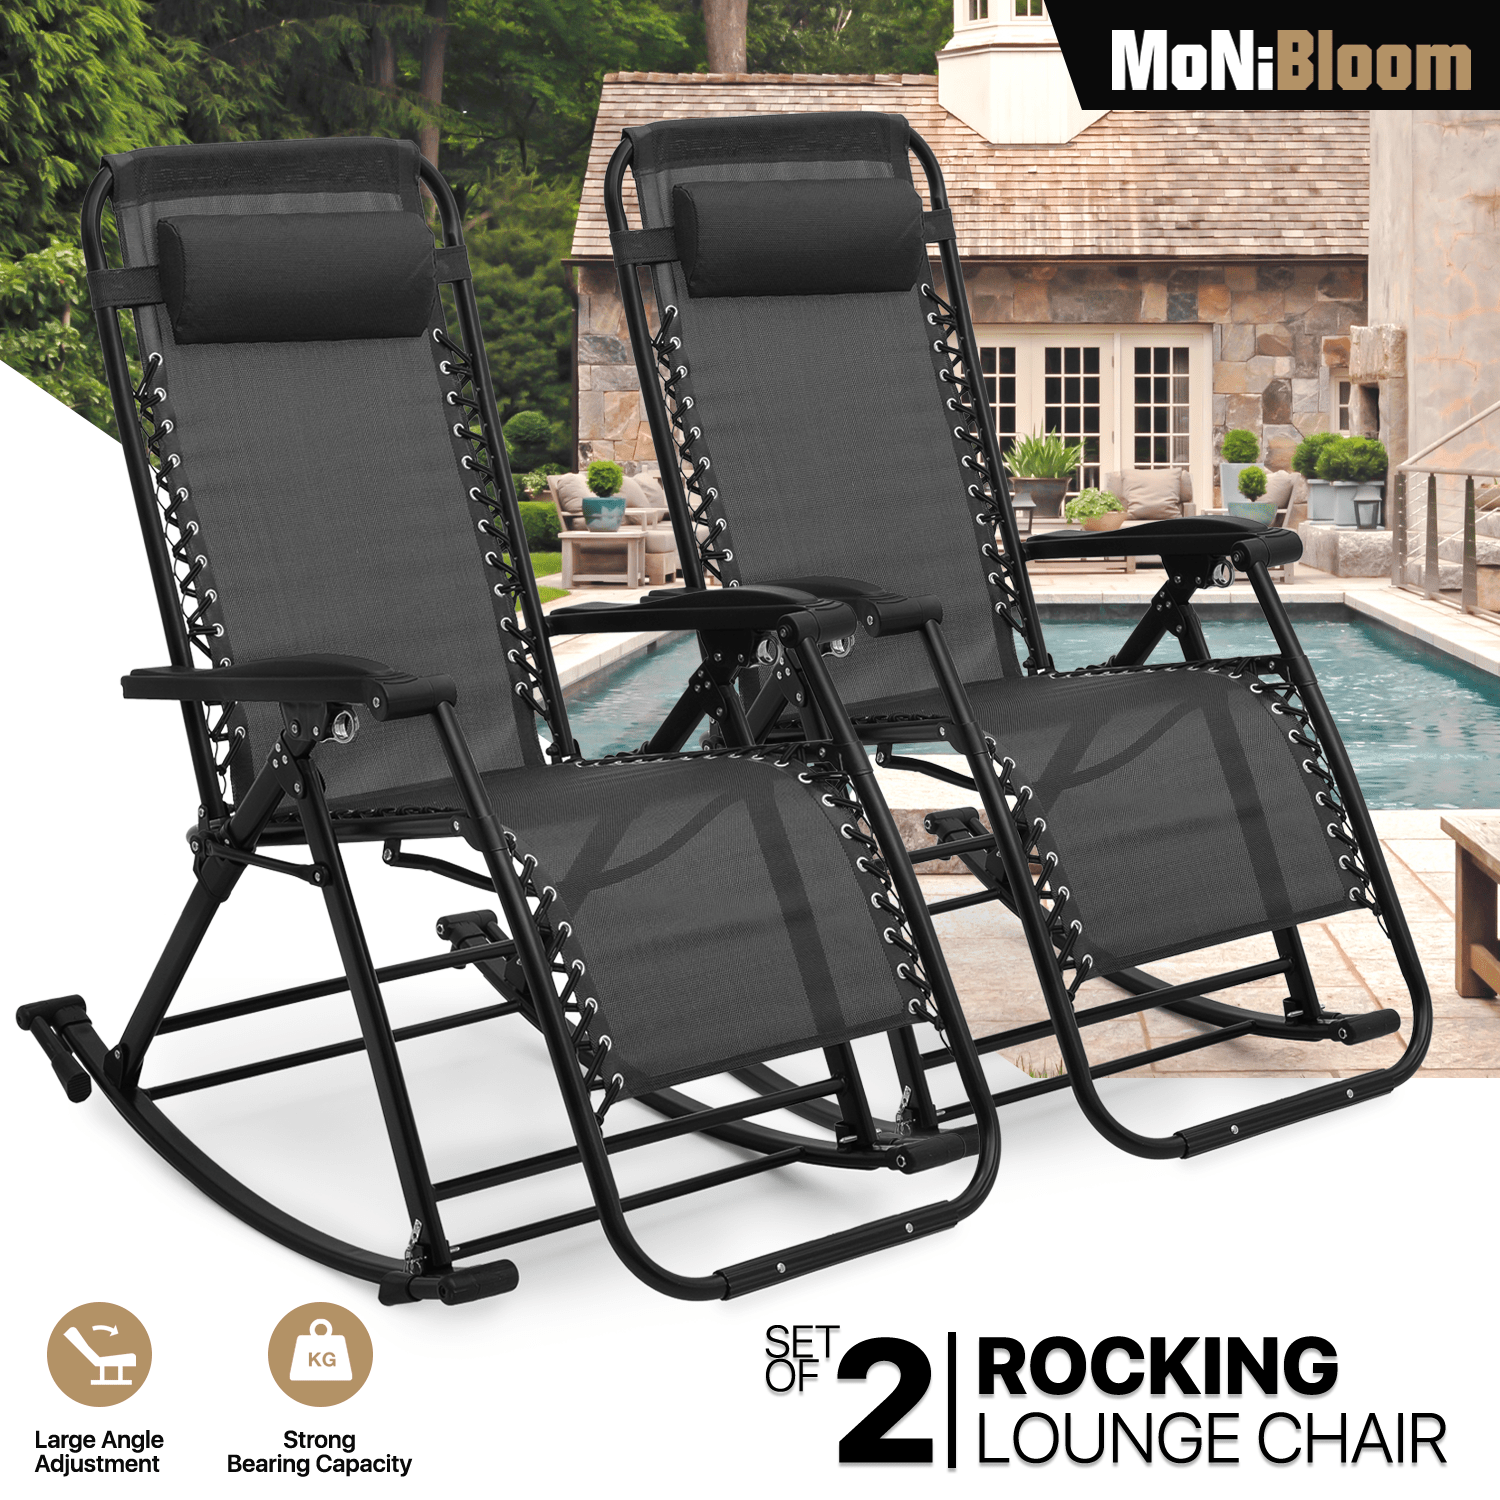 

Rocking Lounger Outdoor Chair Set Of 2, Portable High Back Compact Foldable Reclining 0 Gravity Lounge Patio Rocking Chair With Adjustable Armrest And Footrest For Beach Yard Pool Outdoor